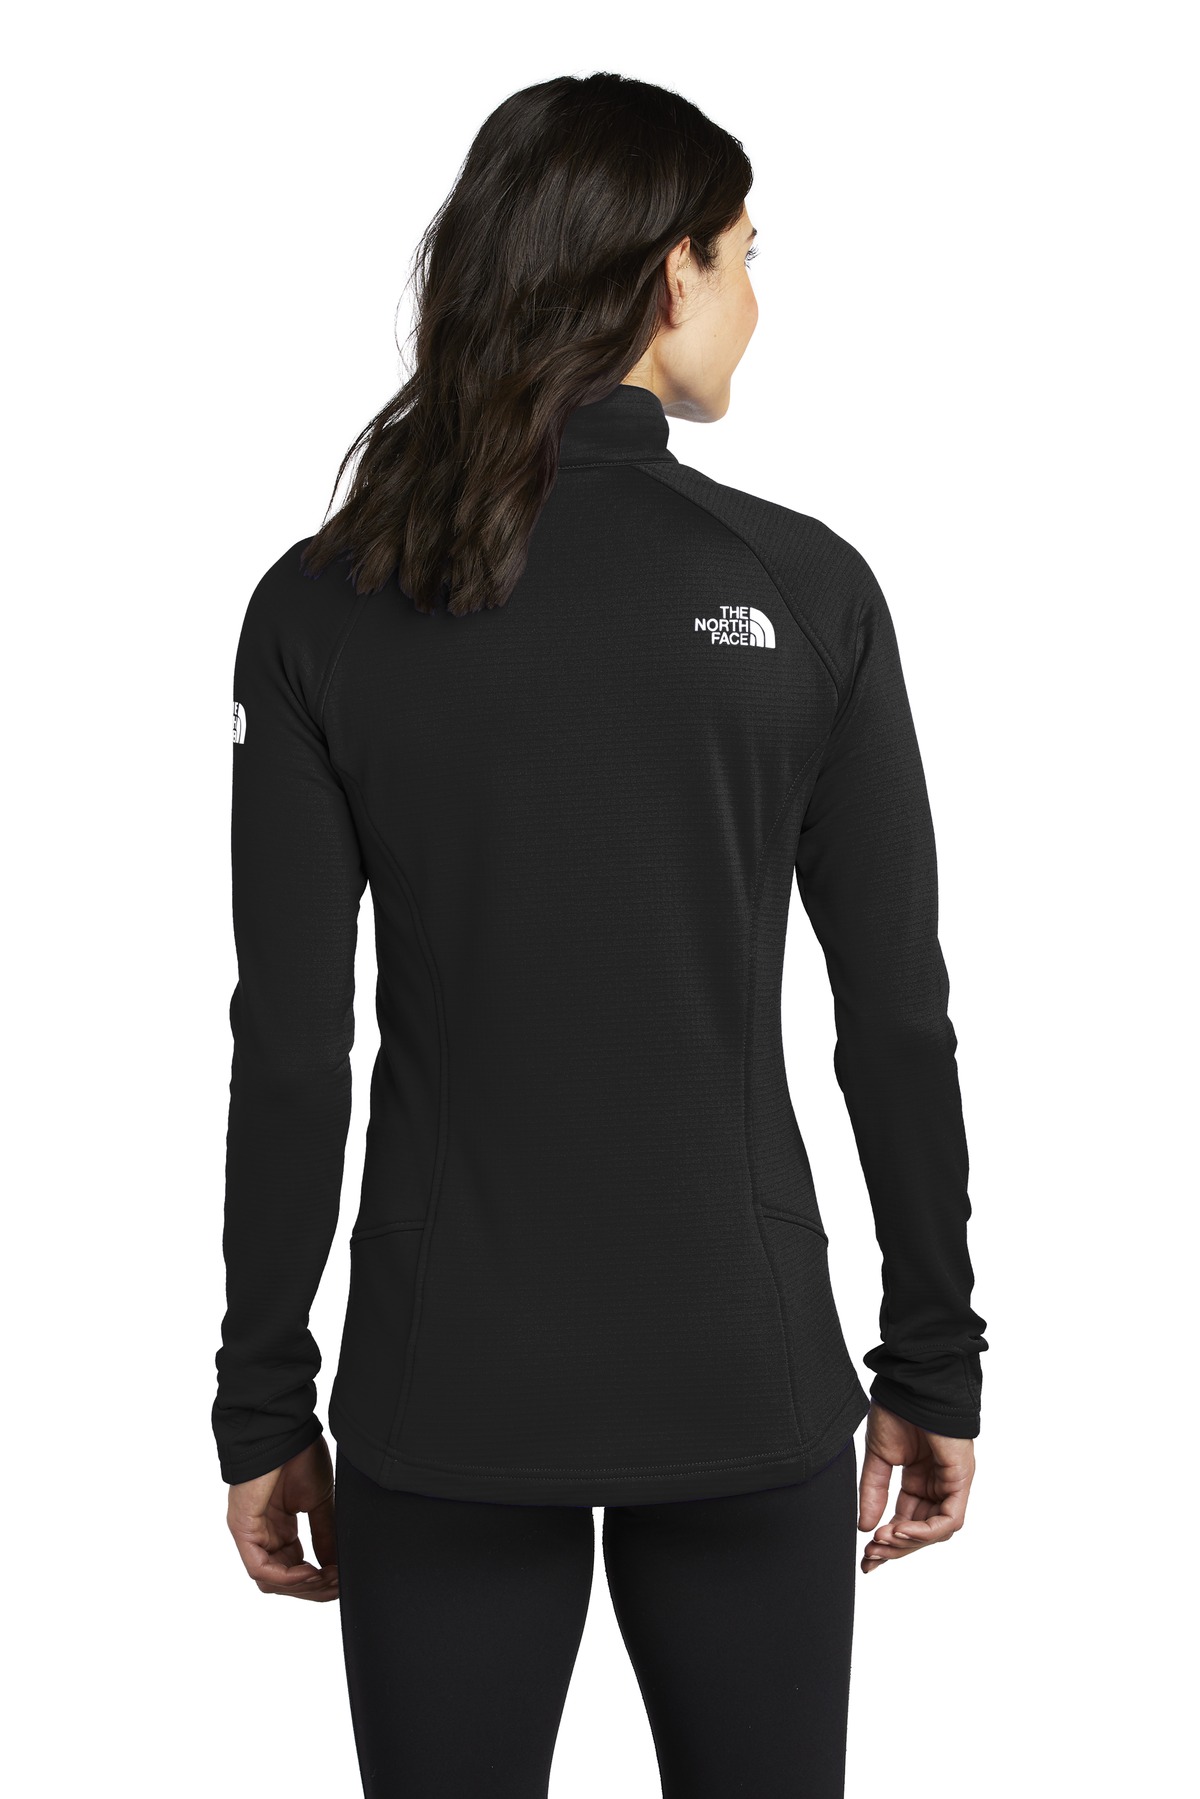 The North Face Ladies Mountain Peaks 1/4-Zip Fleece NF0A47FC | Uniforms ...